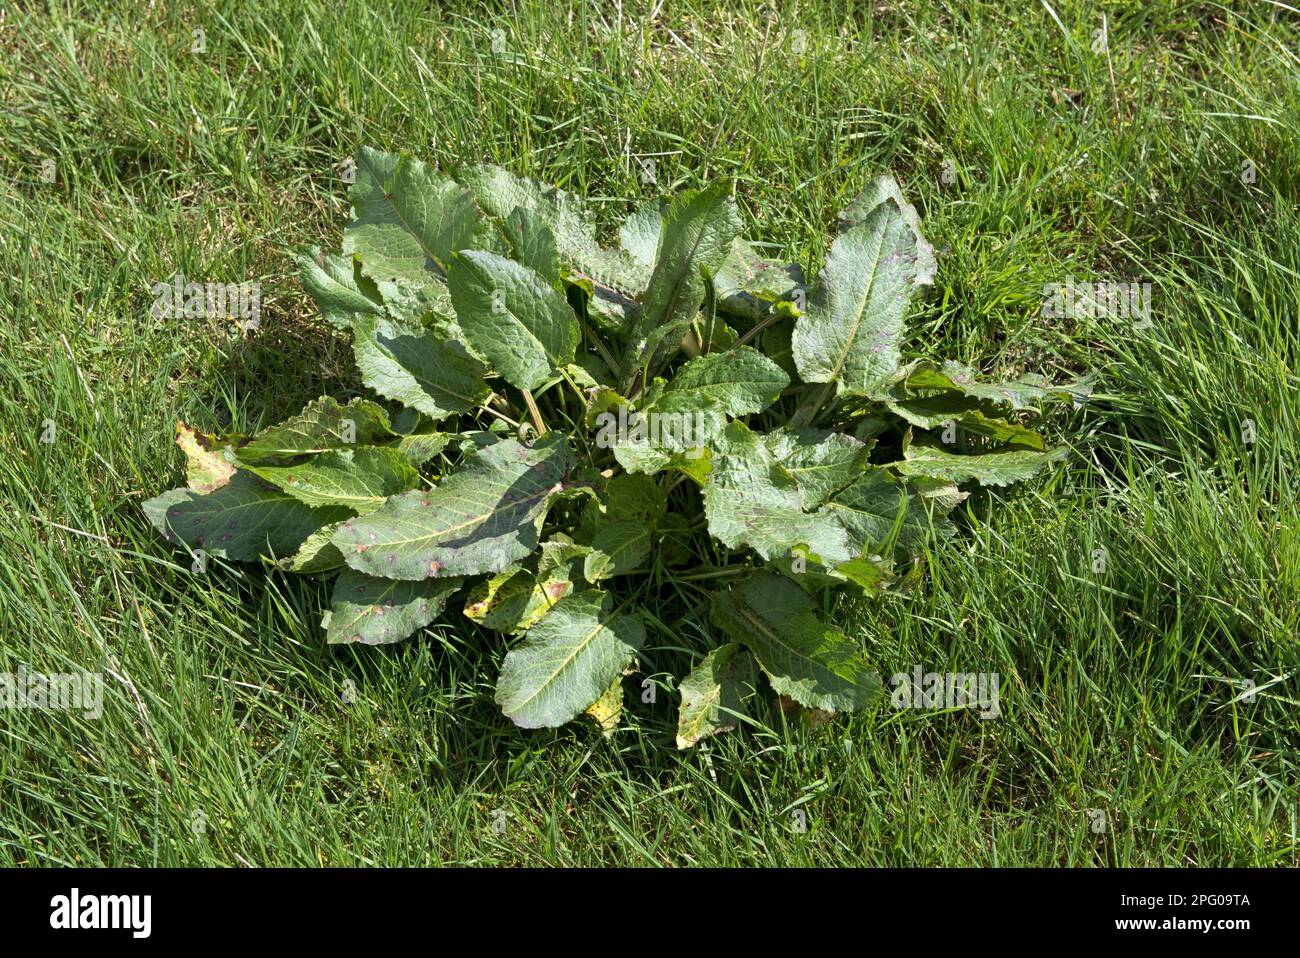 Broad-leaved dock, Rumex obtusifolius, a weed in grassy pasture Stock Photo